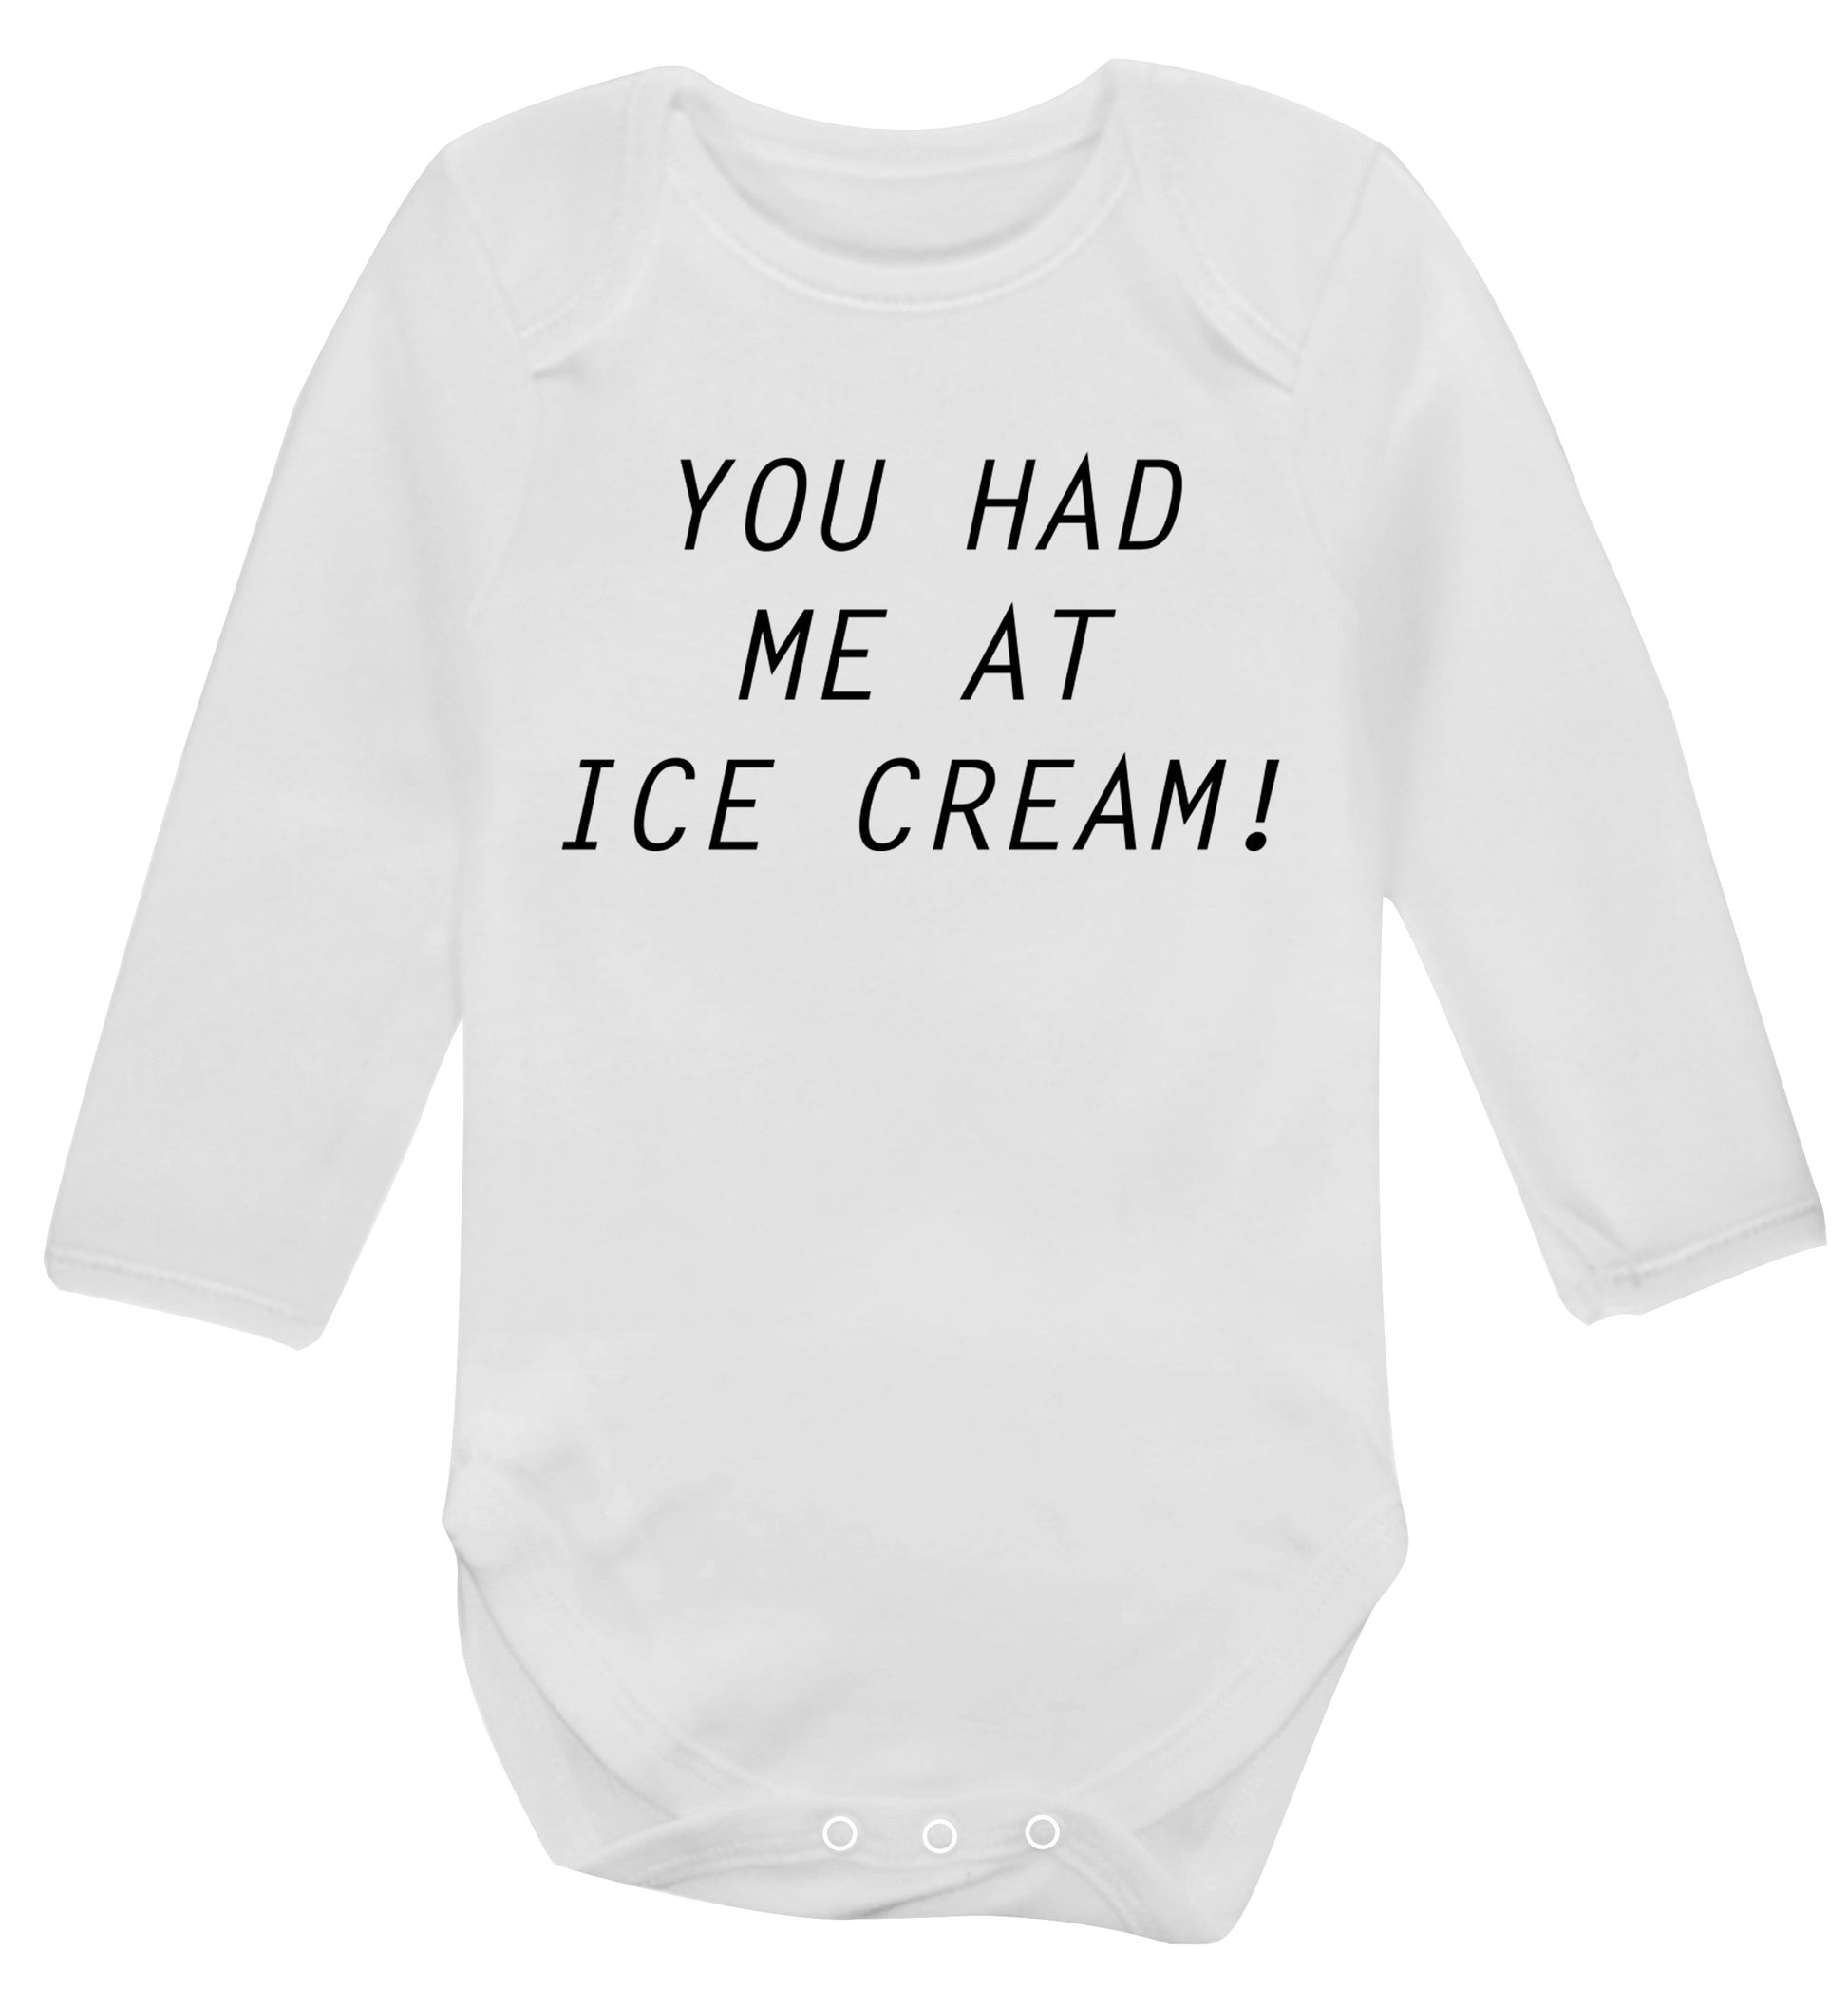 You had me at ice cream Baby Vest long sleeved white 6-12 months